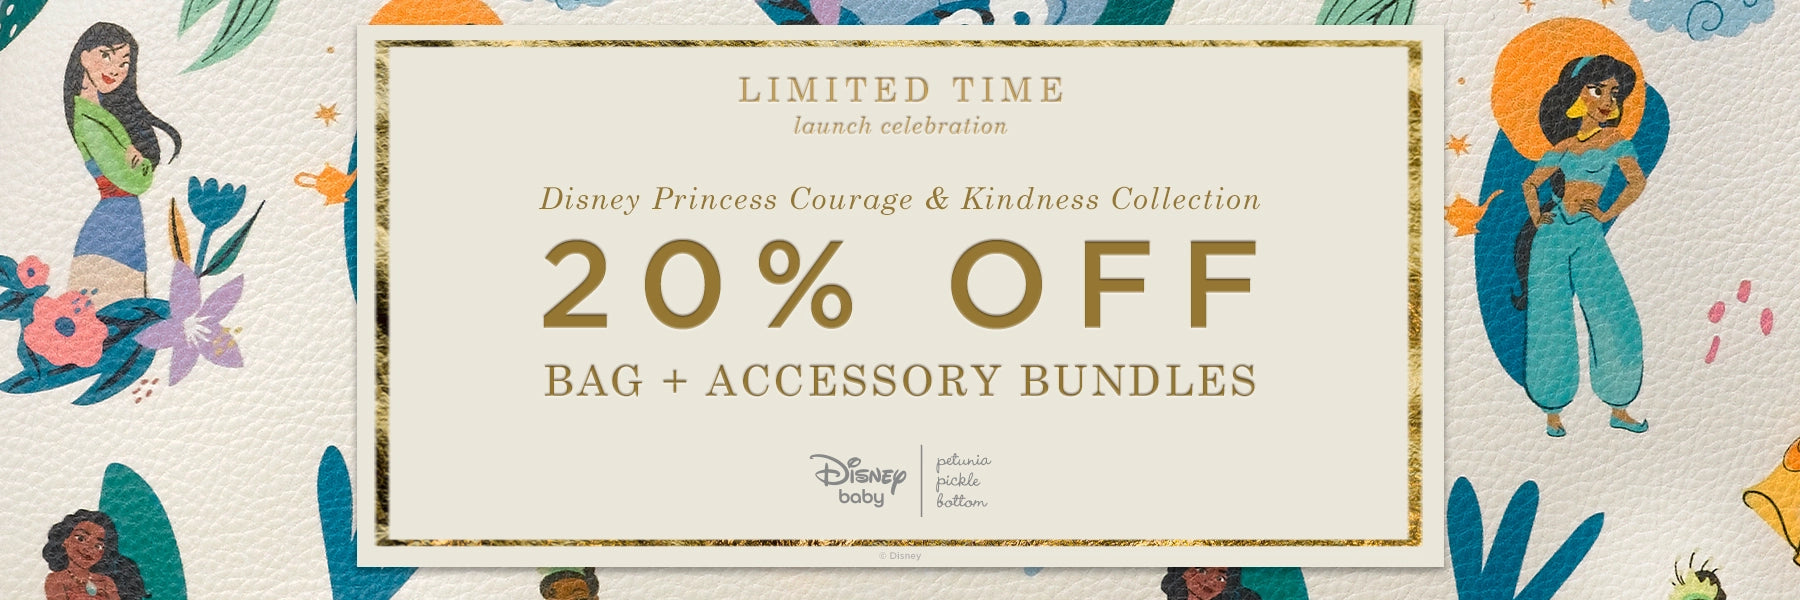 limited time launch celebration. disney princess courage & kindness collection 20% off bag + accessory bundles. disney baby by petunia pickle bottom